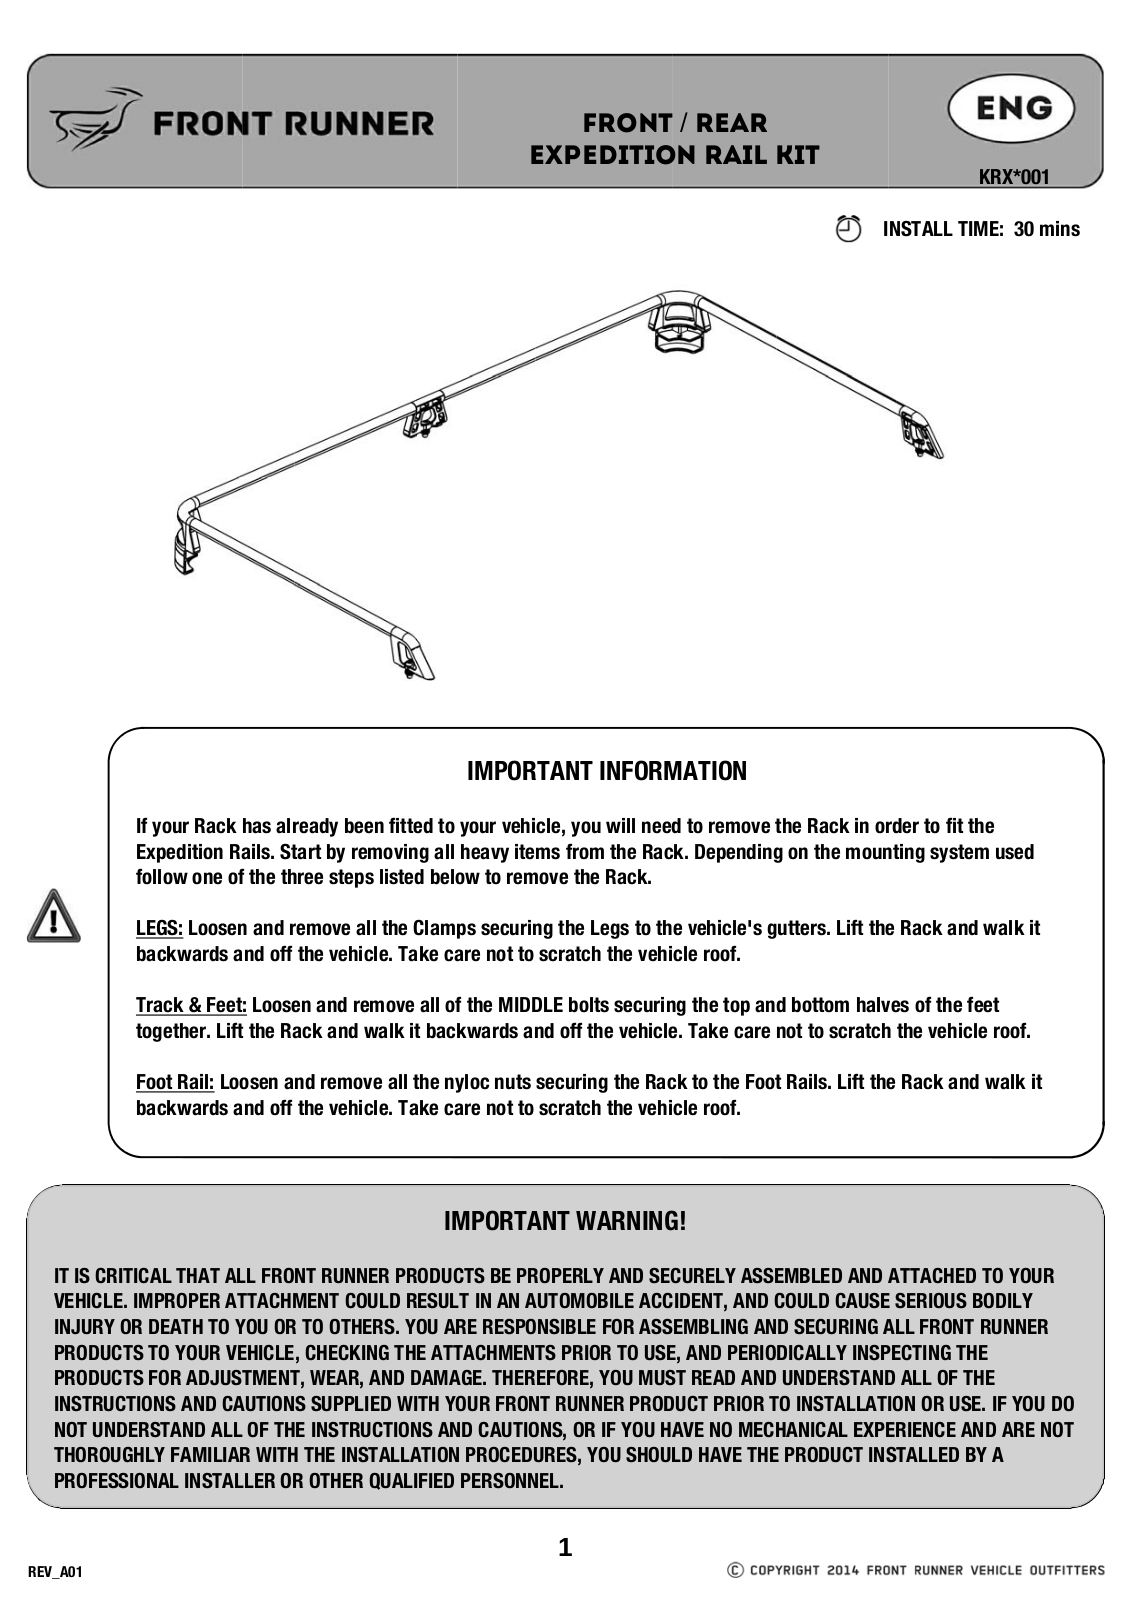 Installation instructions for KRXD001